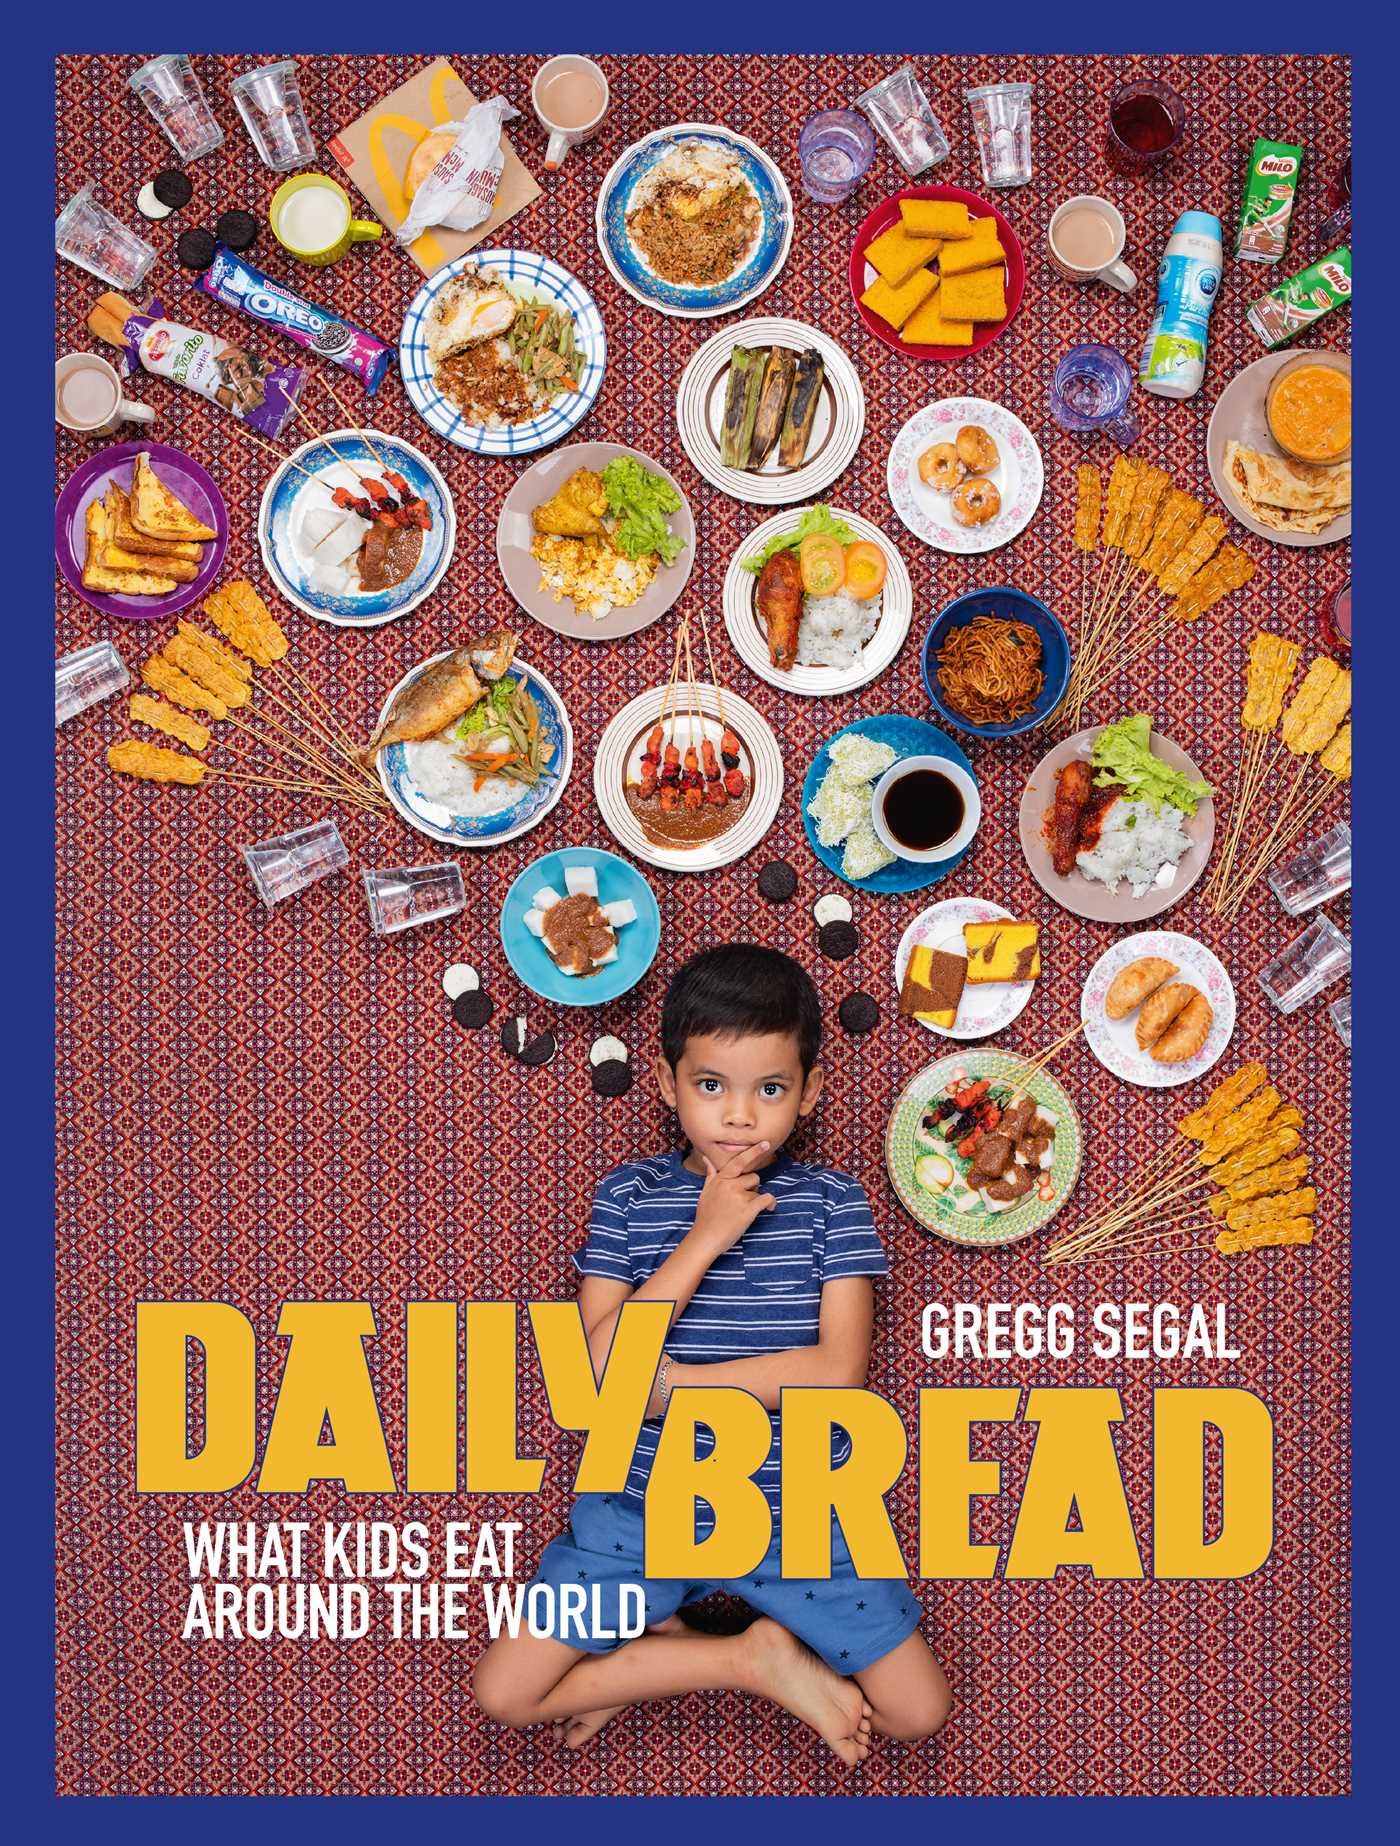 Daily Bread: What Kids Eat Around the World, Book by Gregg Segal